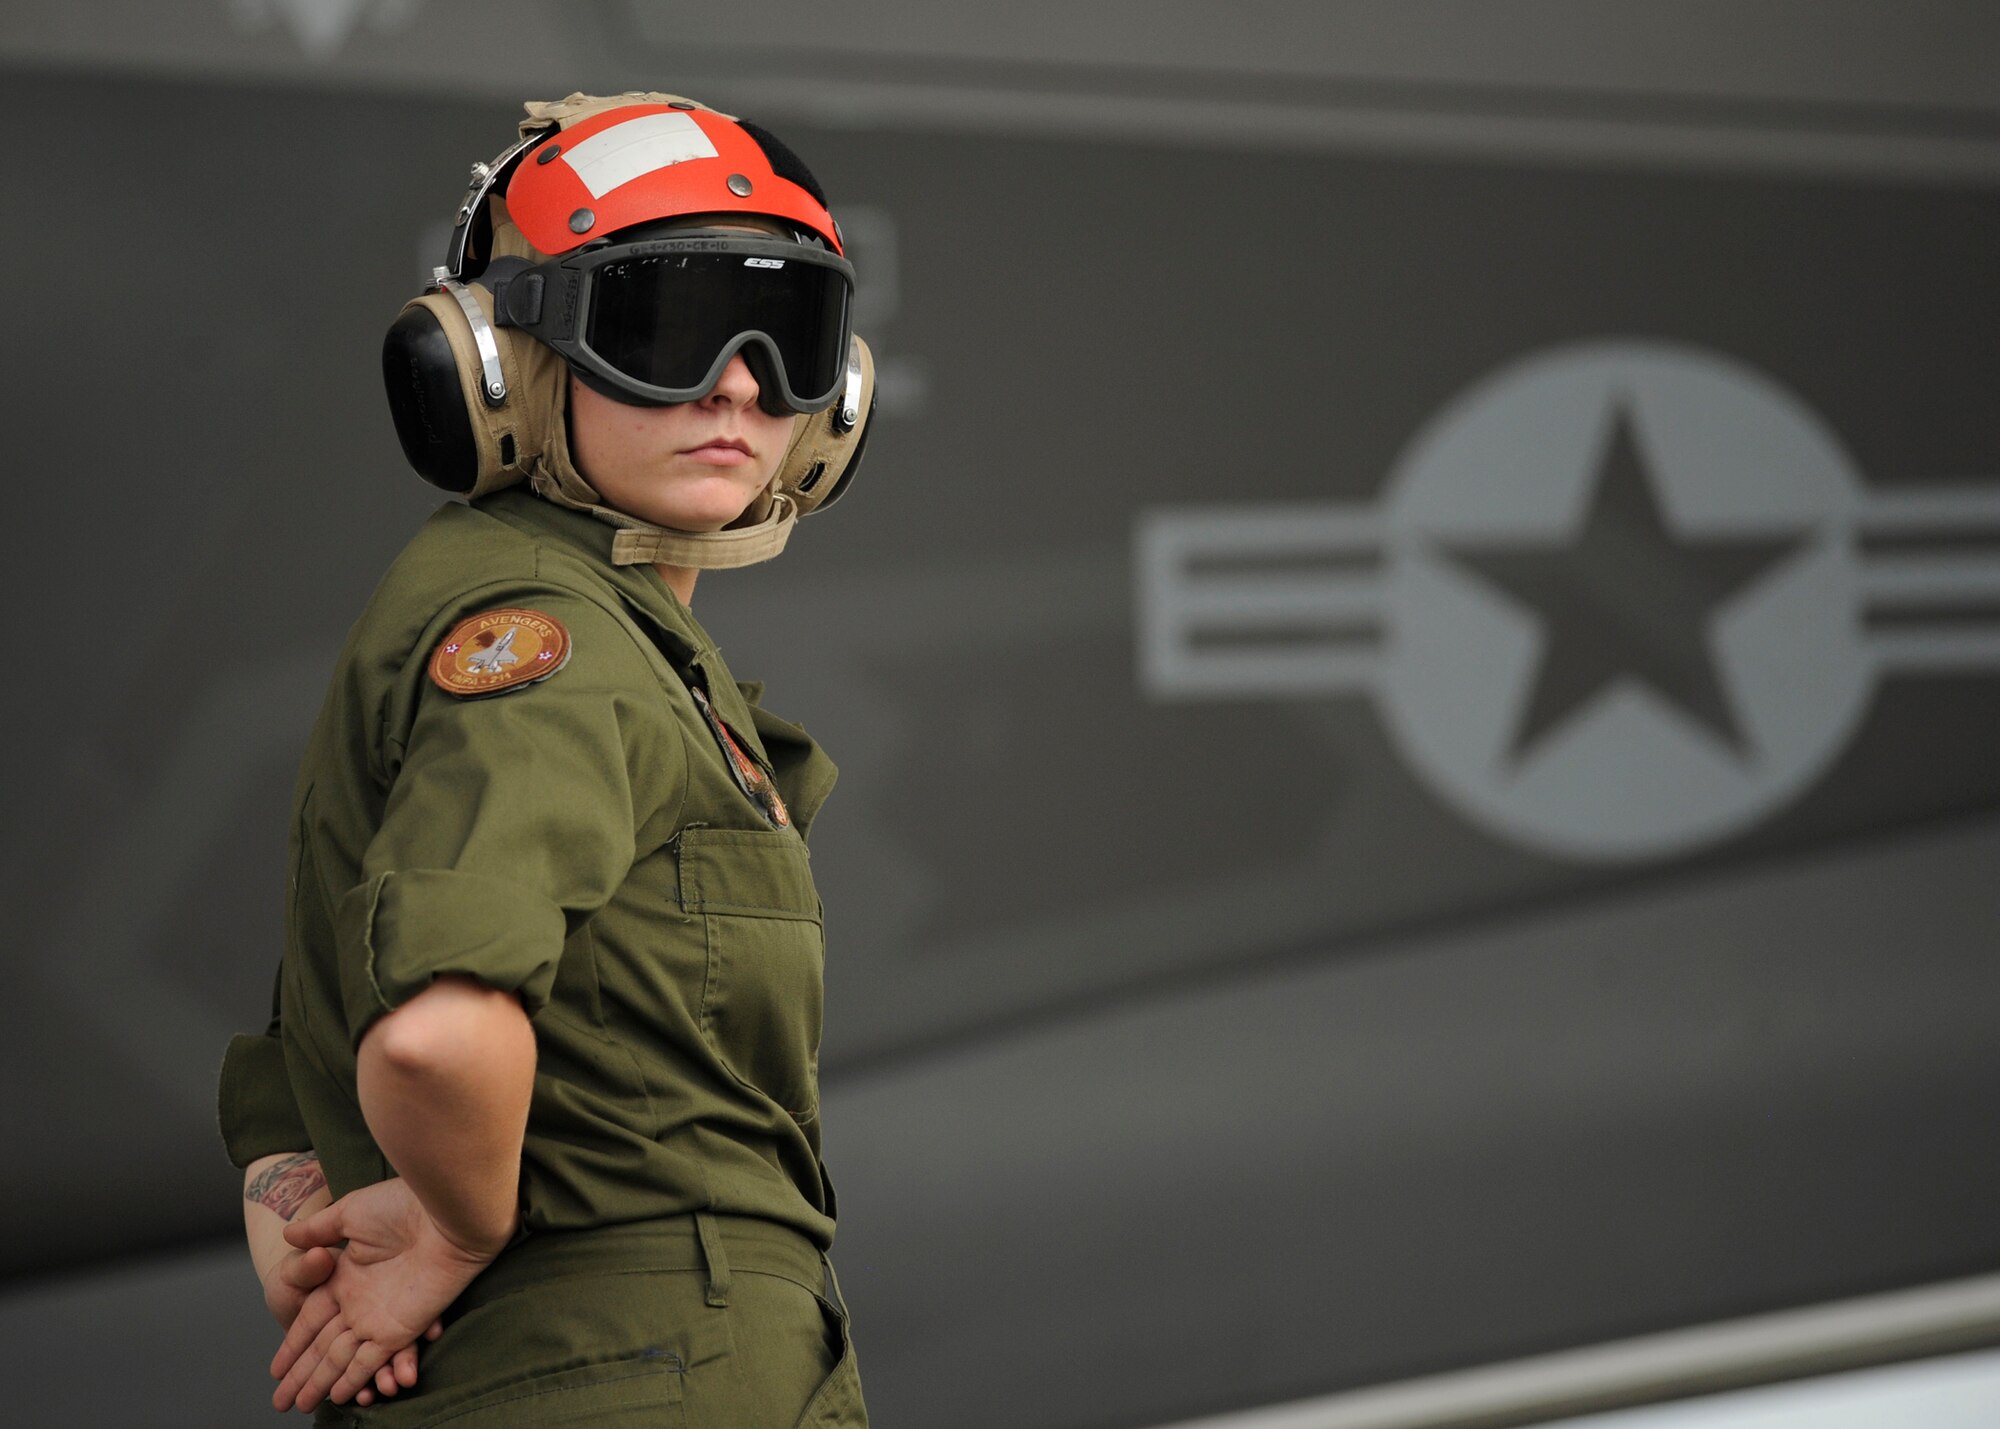 U.S. Marine Lance Cpl. Alexah Atteberry, Marine Fighter Attack Squadron (VMFA) 211 aviation ordnance, prepares to marshal an F-35 Lightning II on the Tyndall fligthline Sept. 16, 2016. Atteberry deployed with VMFA 211 to Tyndall to participate in a 53rd Weapon Evaluation Group Combat Archer training program, where her unit preformed the first operational live fire of the F-35’s air-to-air missile weapons system. (U.S. Air Force photo by Senior Airman Solomon Cook/Released)